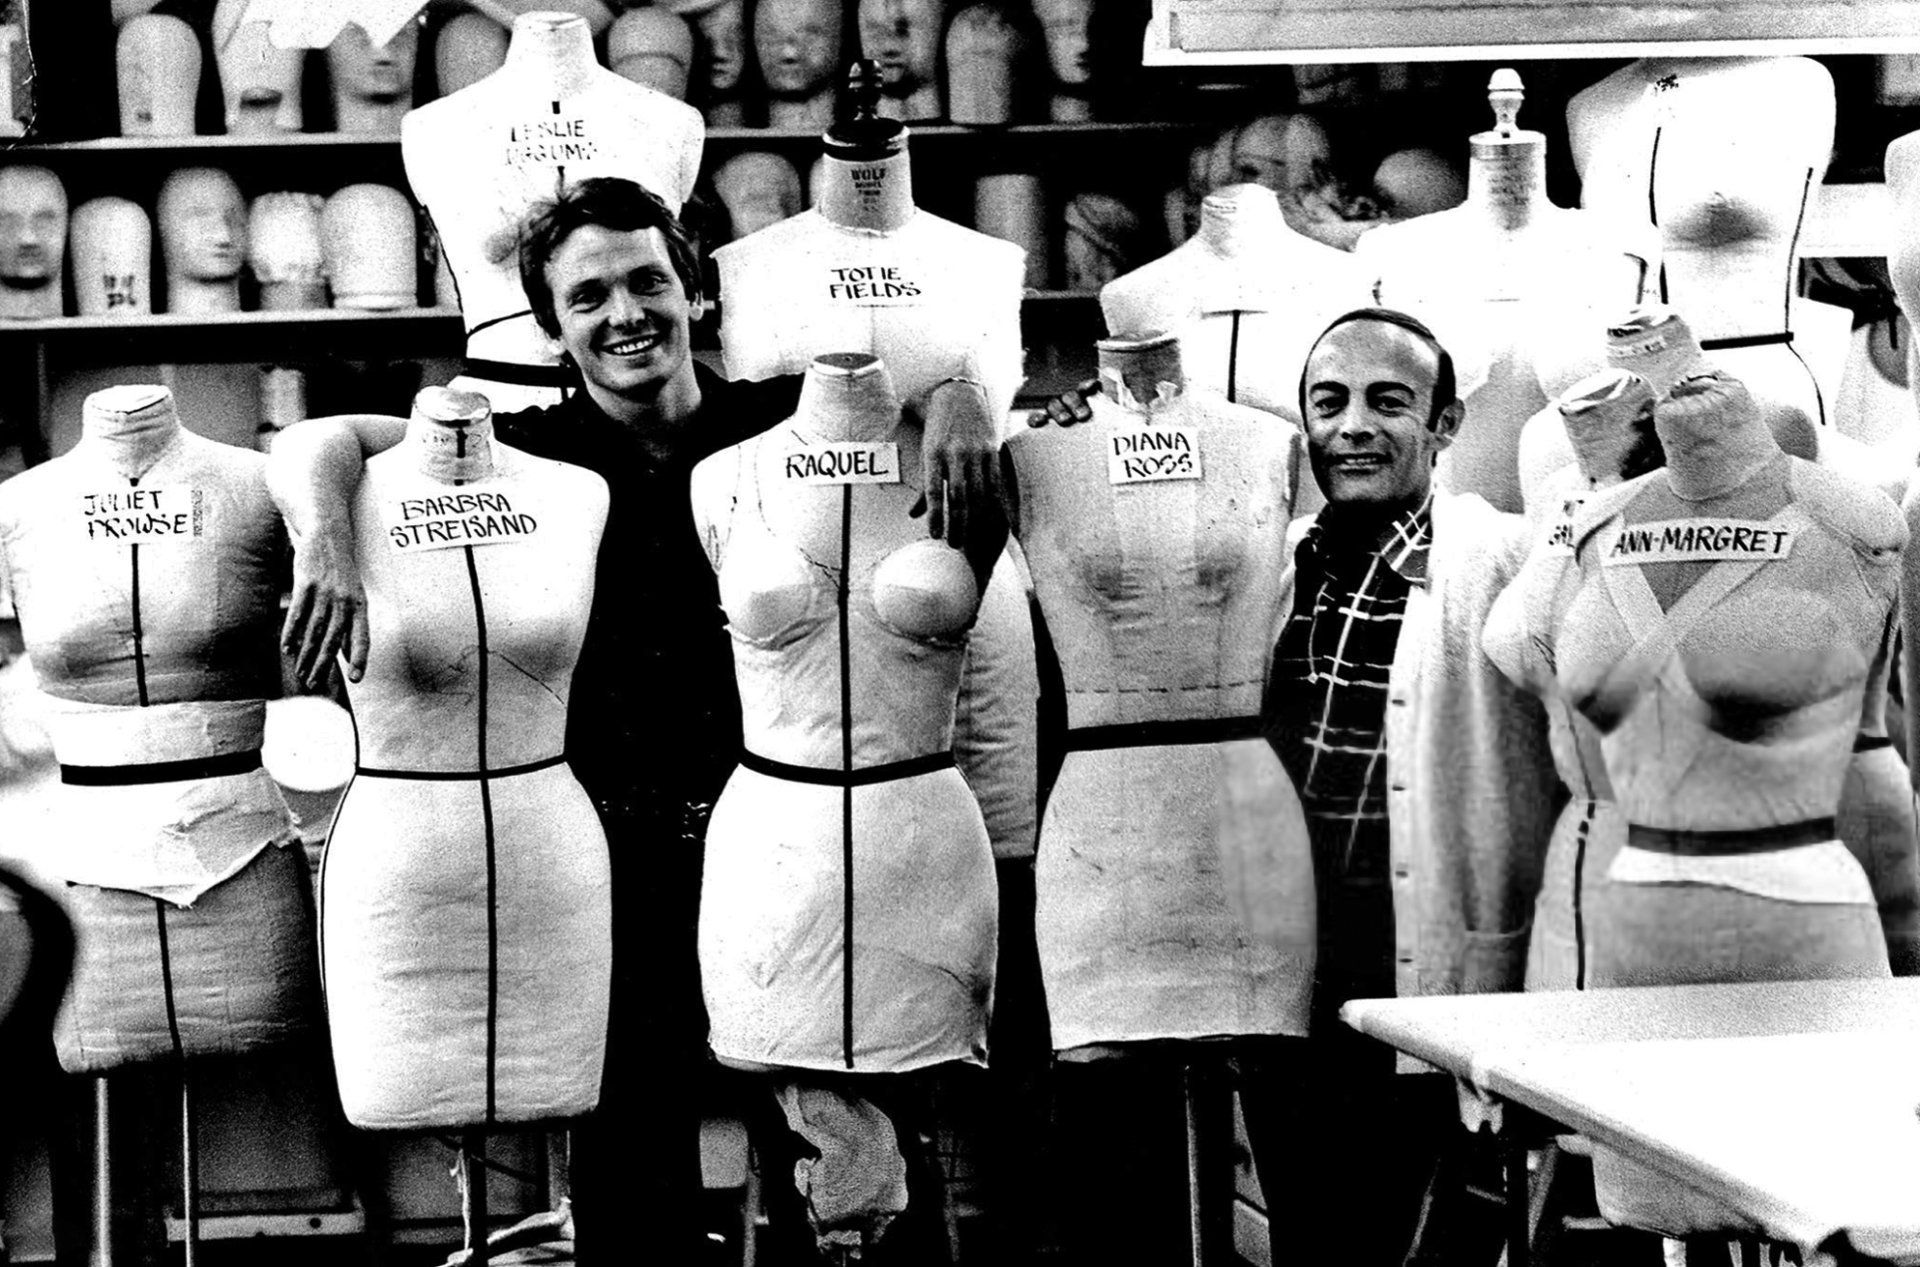 Bob Mackie and Ray Aghayan with dress forms for some of their famous clients.